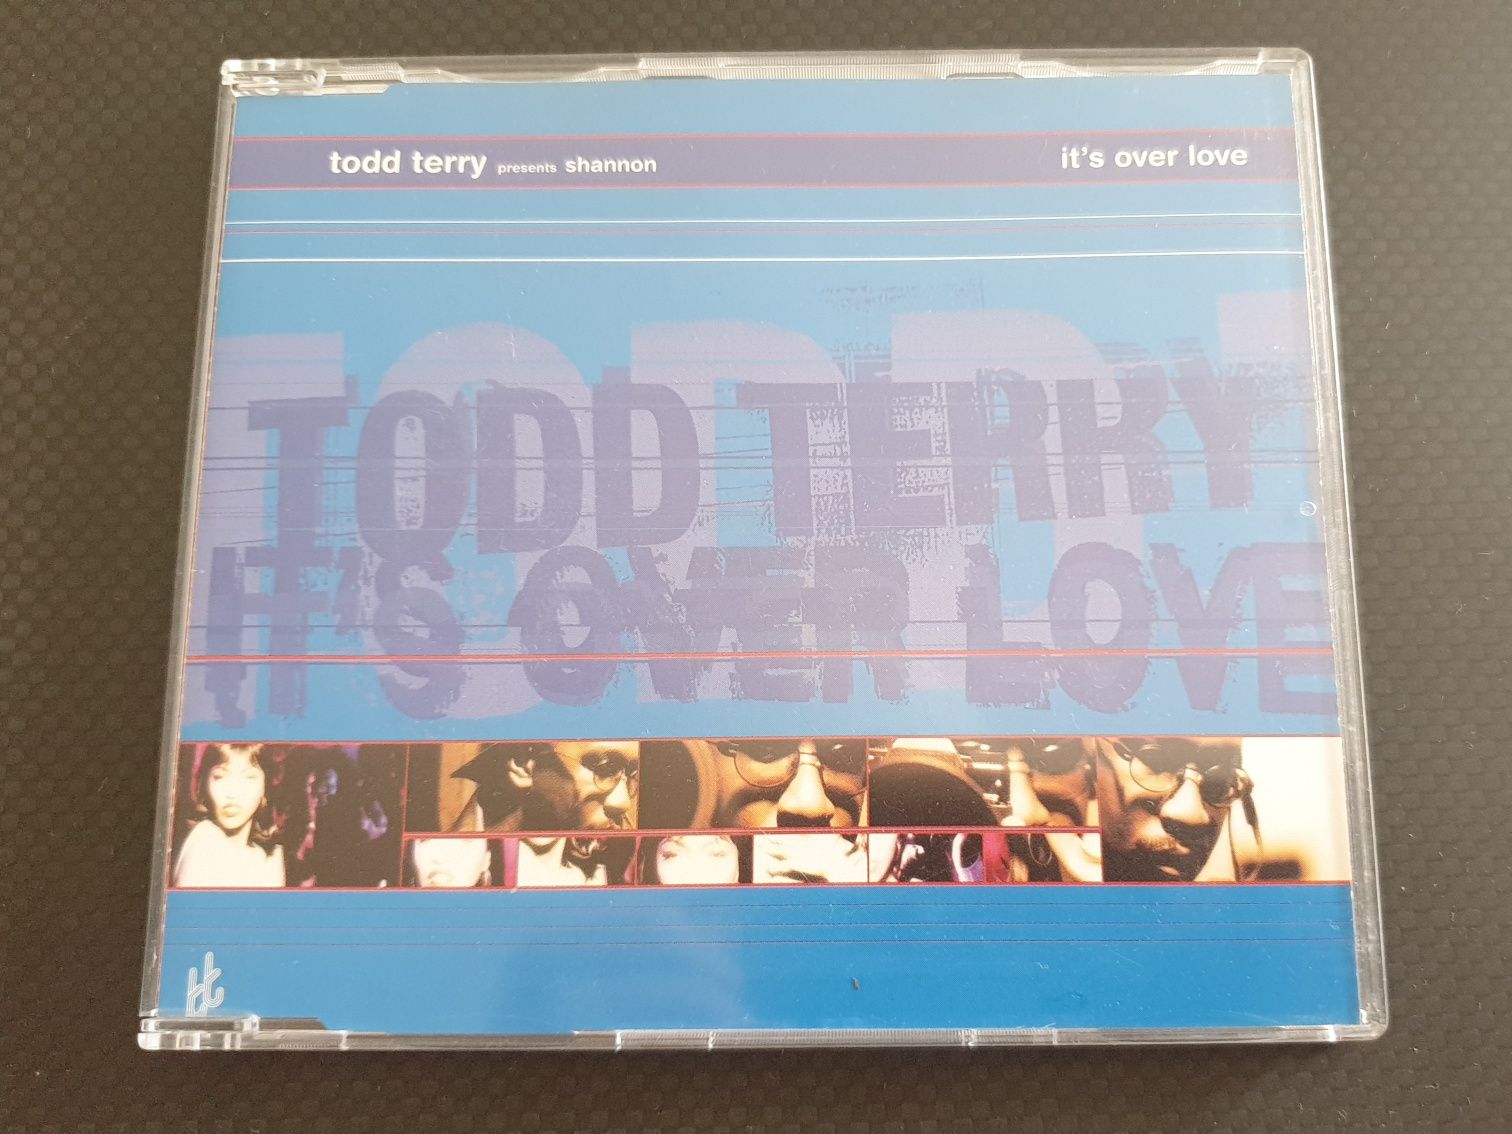 Todd Terry presents Shannon - It's Over Love - CDM - Mint